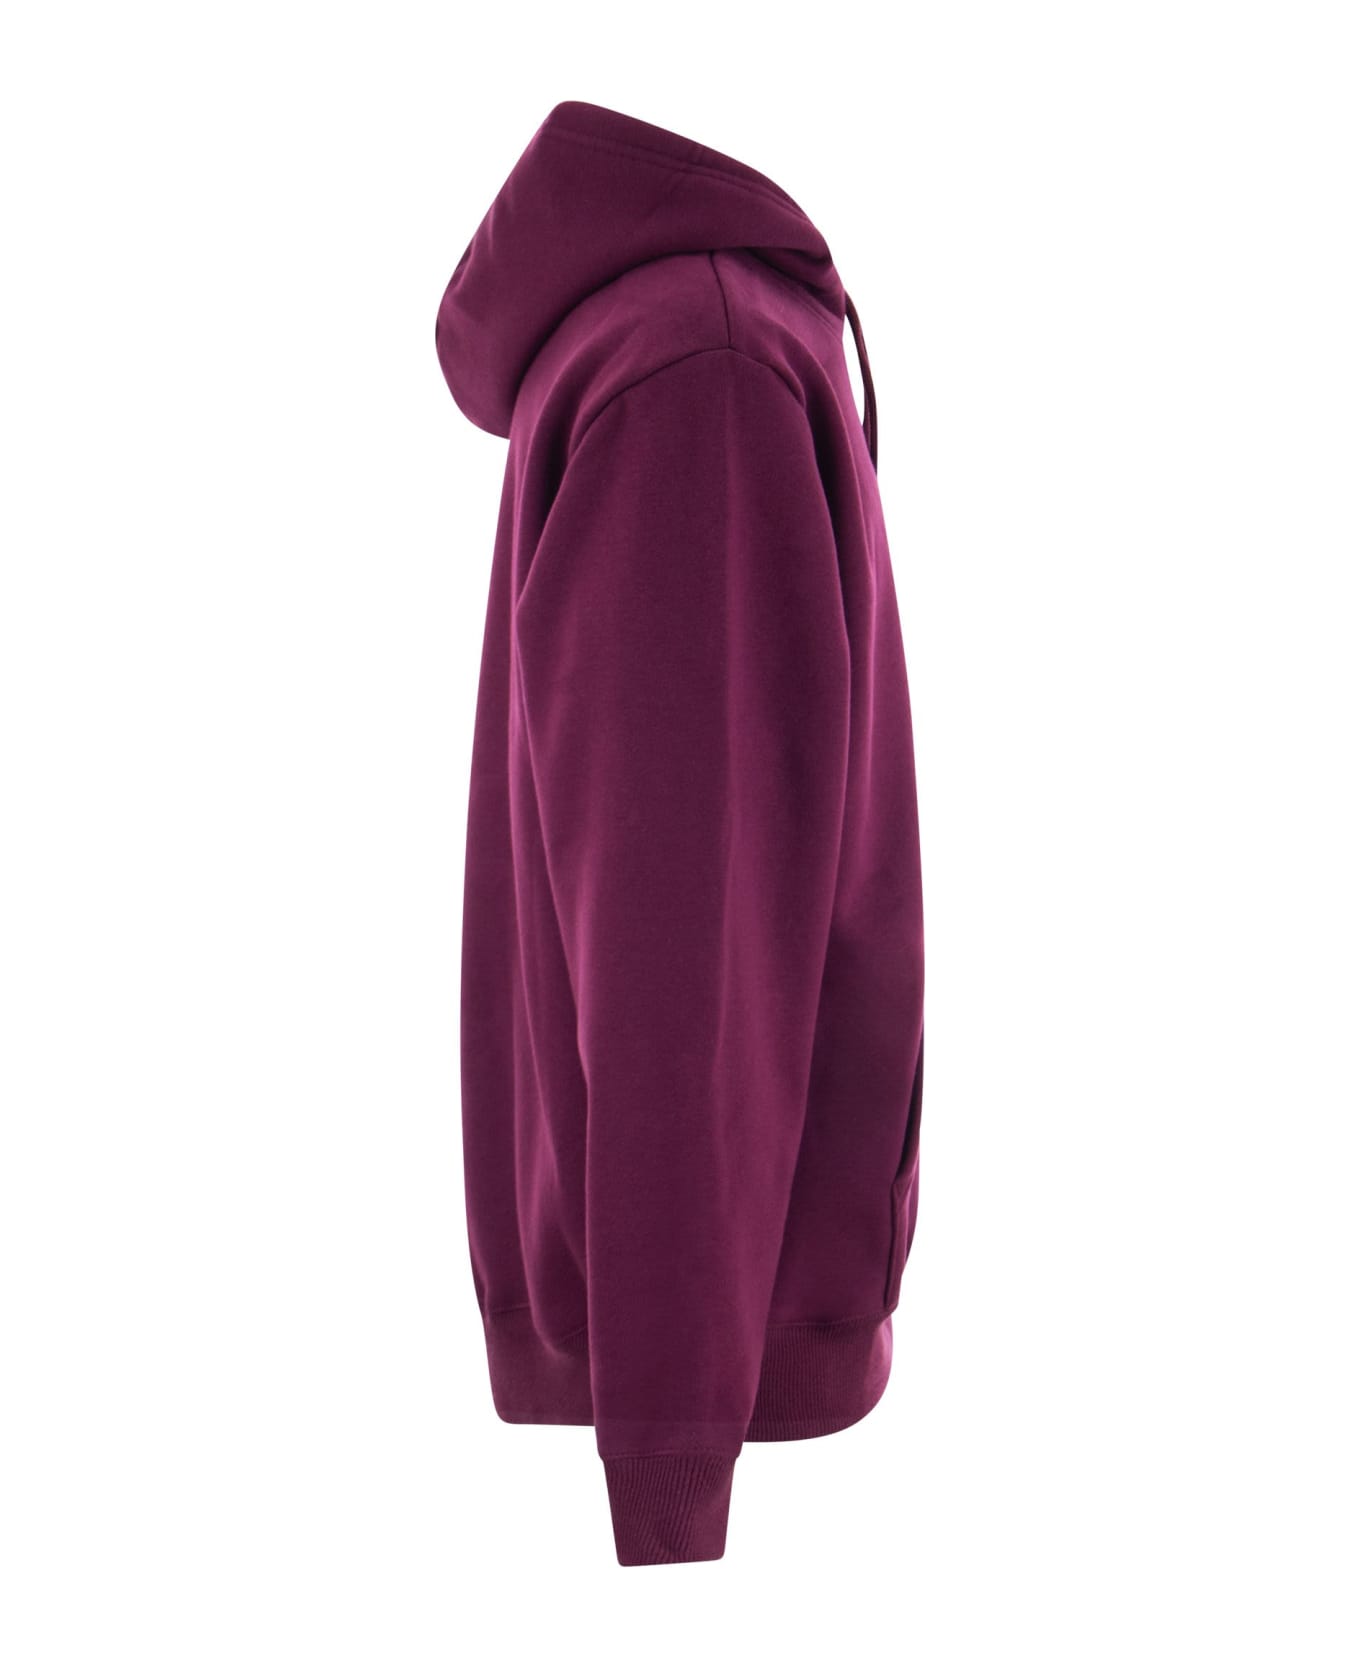 The North Face Heavyweight - Hoodie - Violet